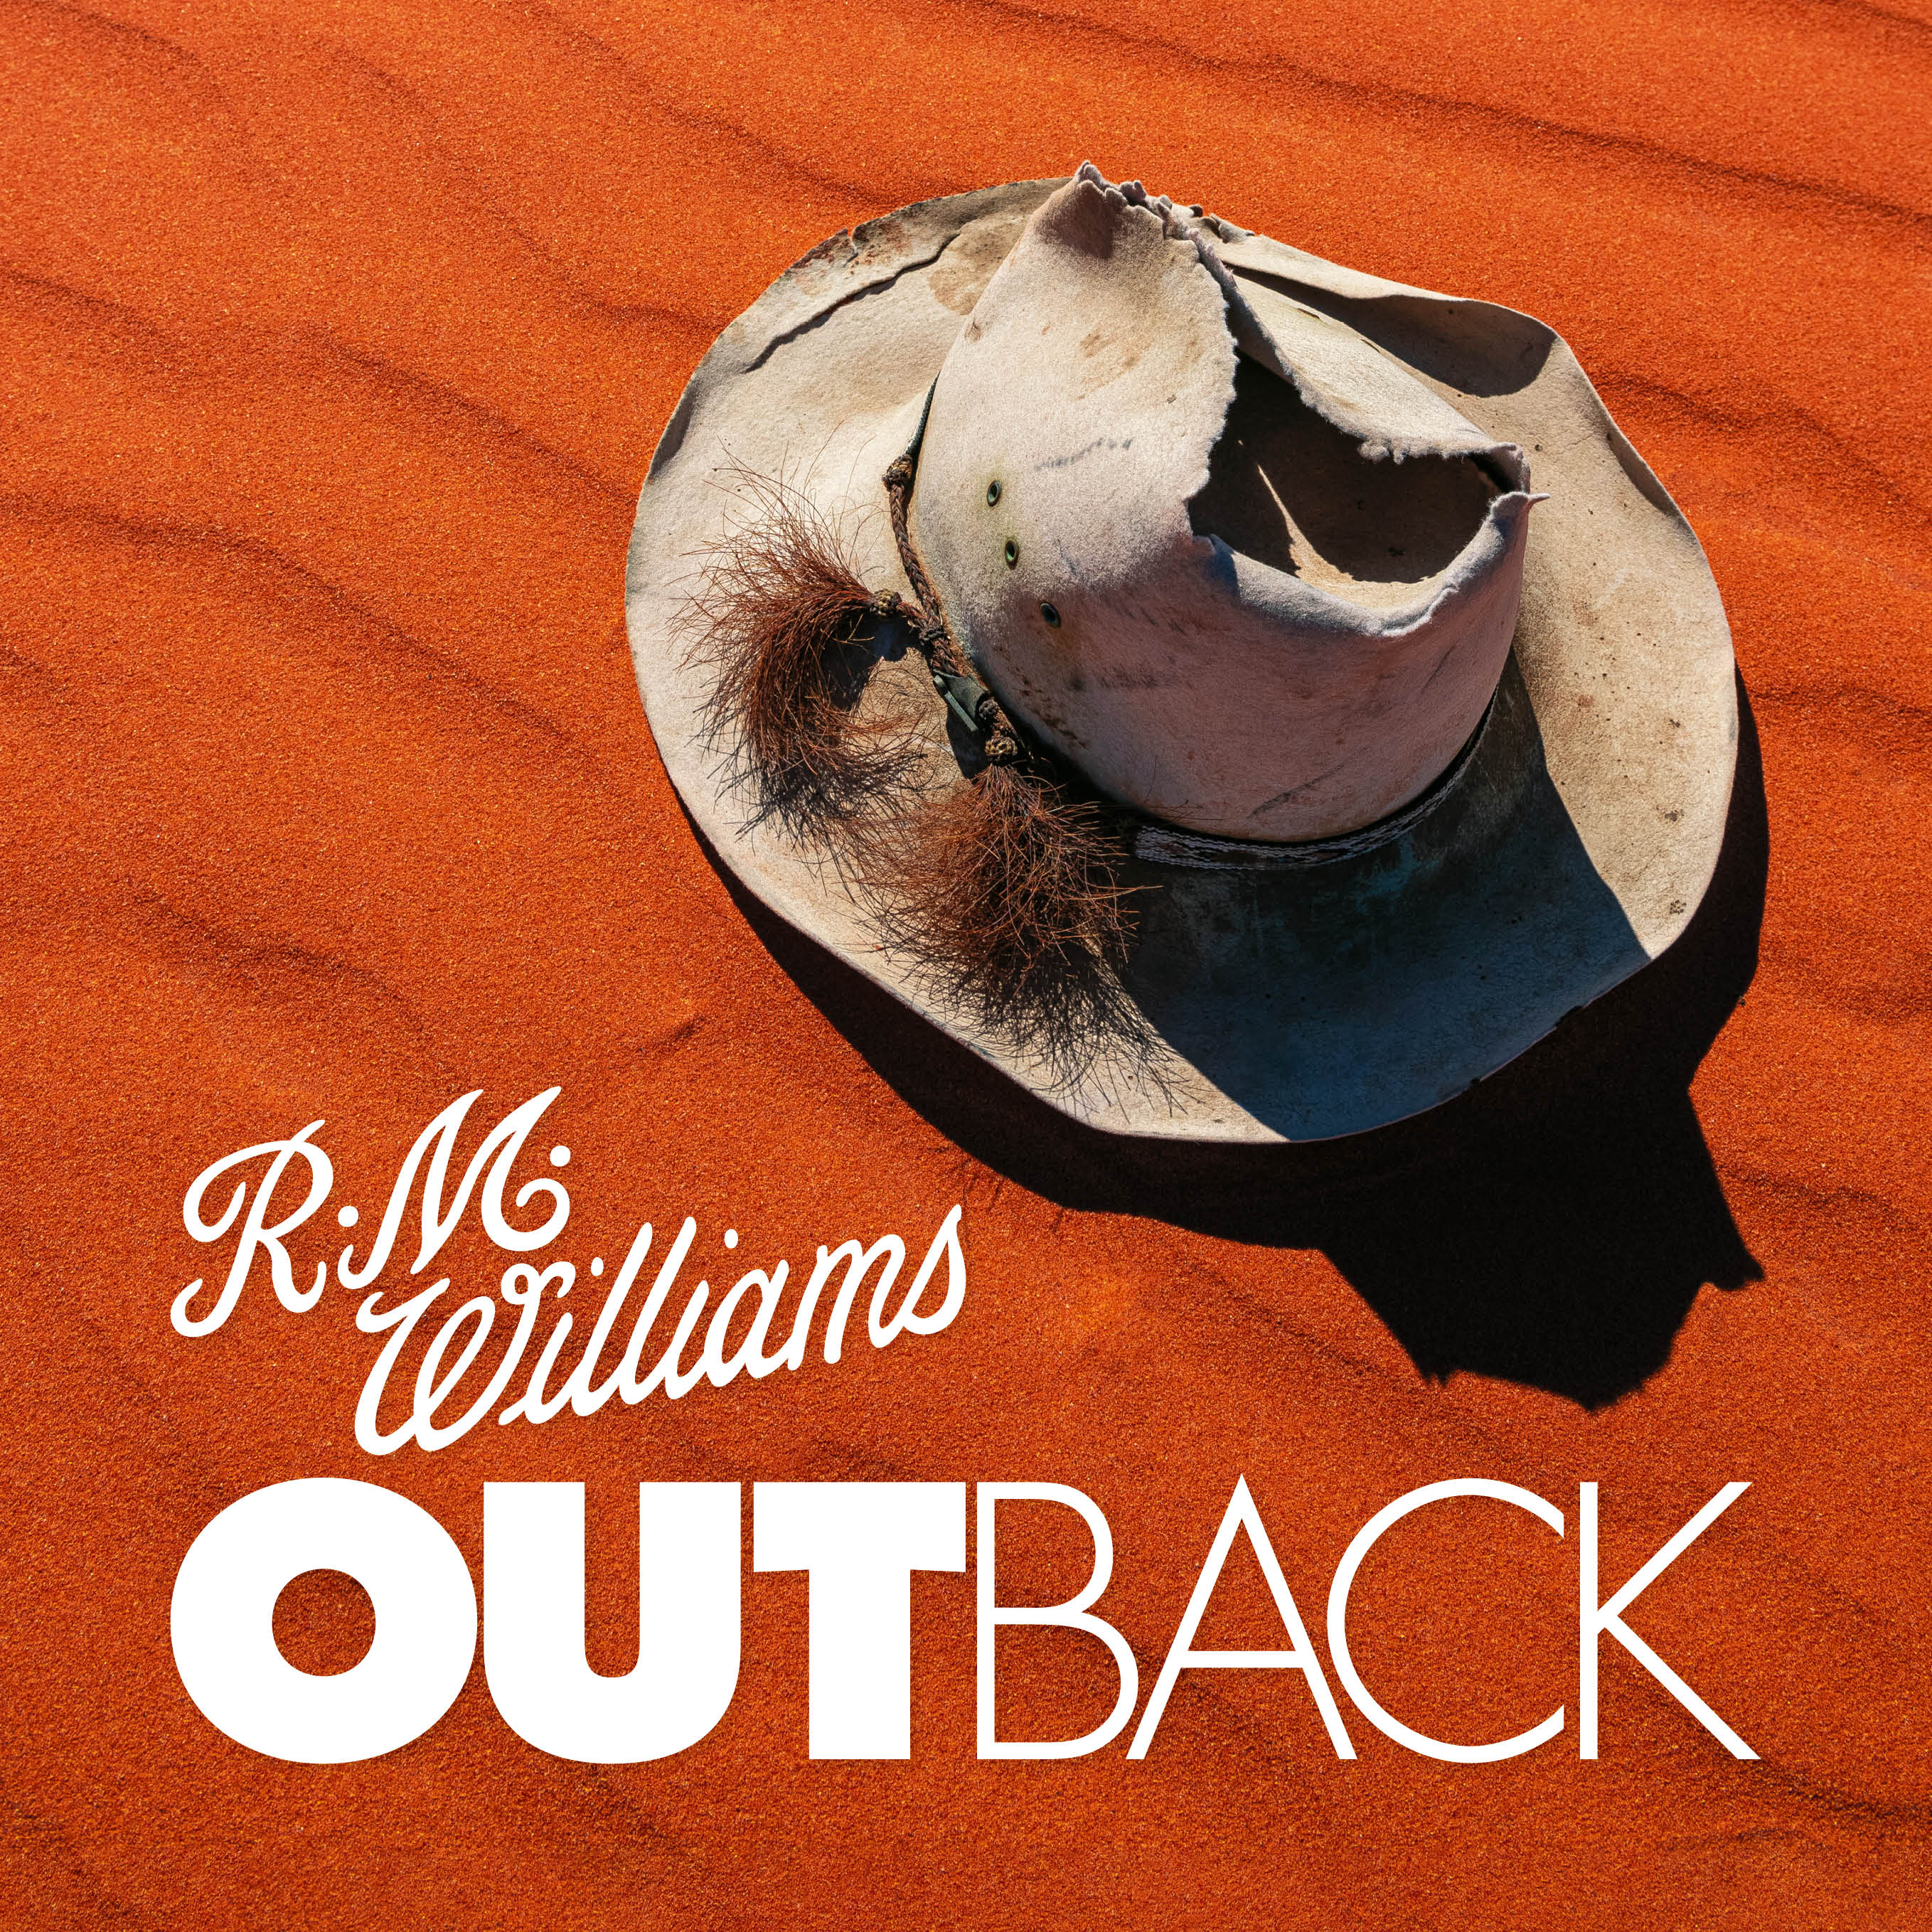 From the Outback to the Office: How R.M.Williams Has Evolved Over